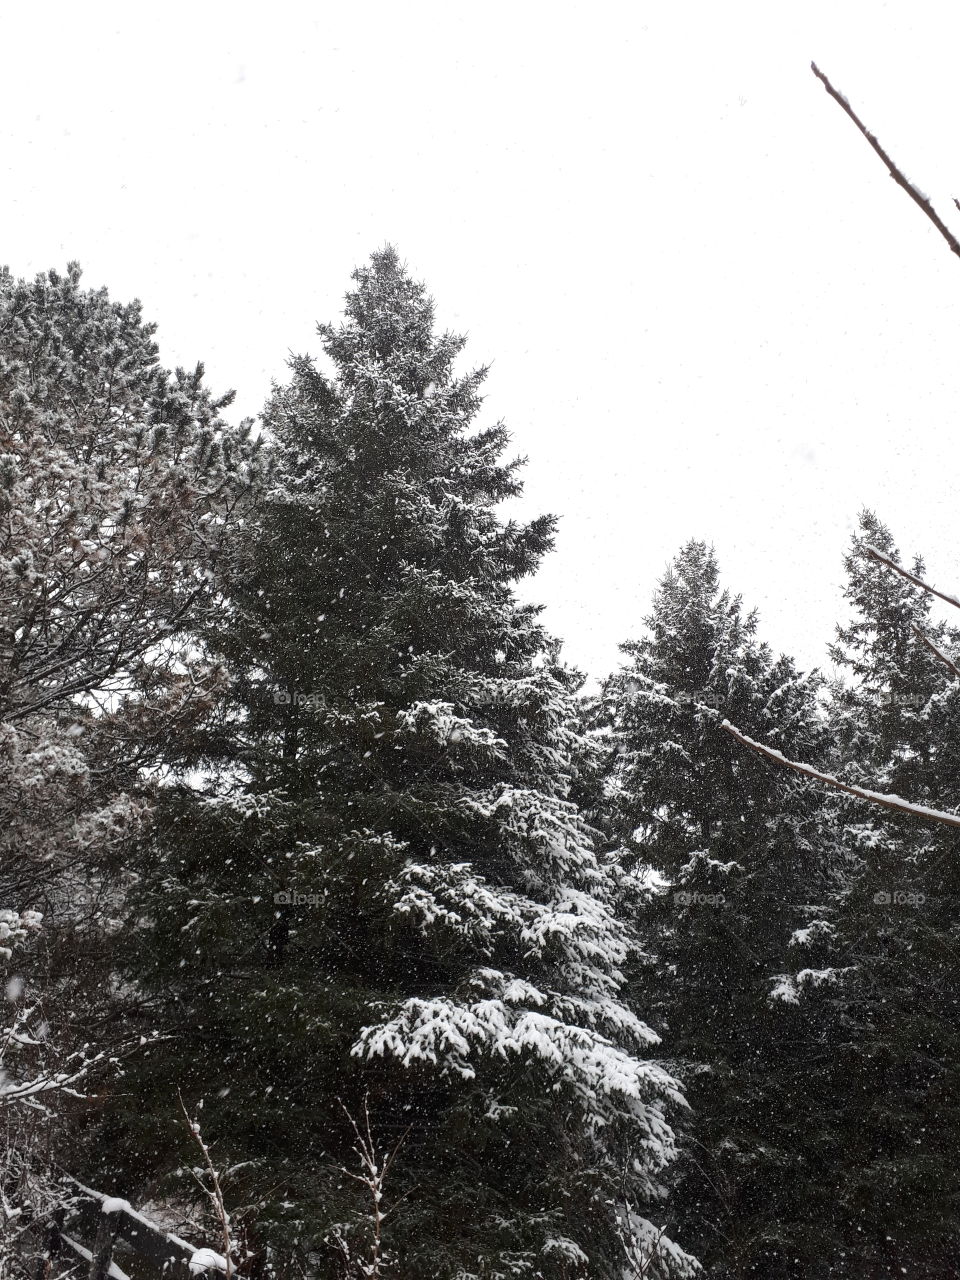 Snow falling on the trees.